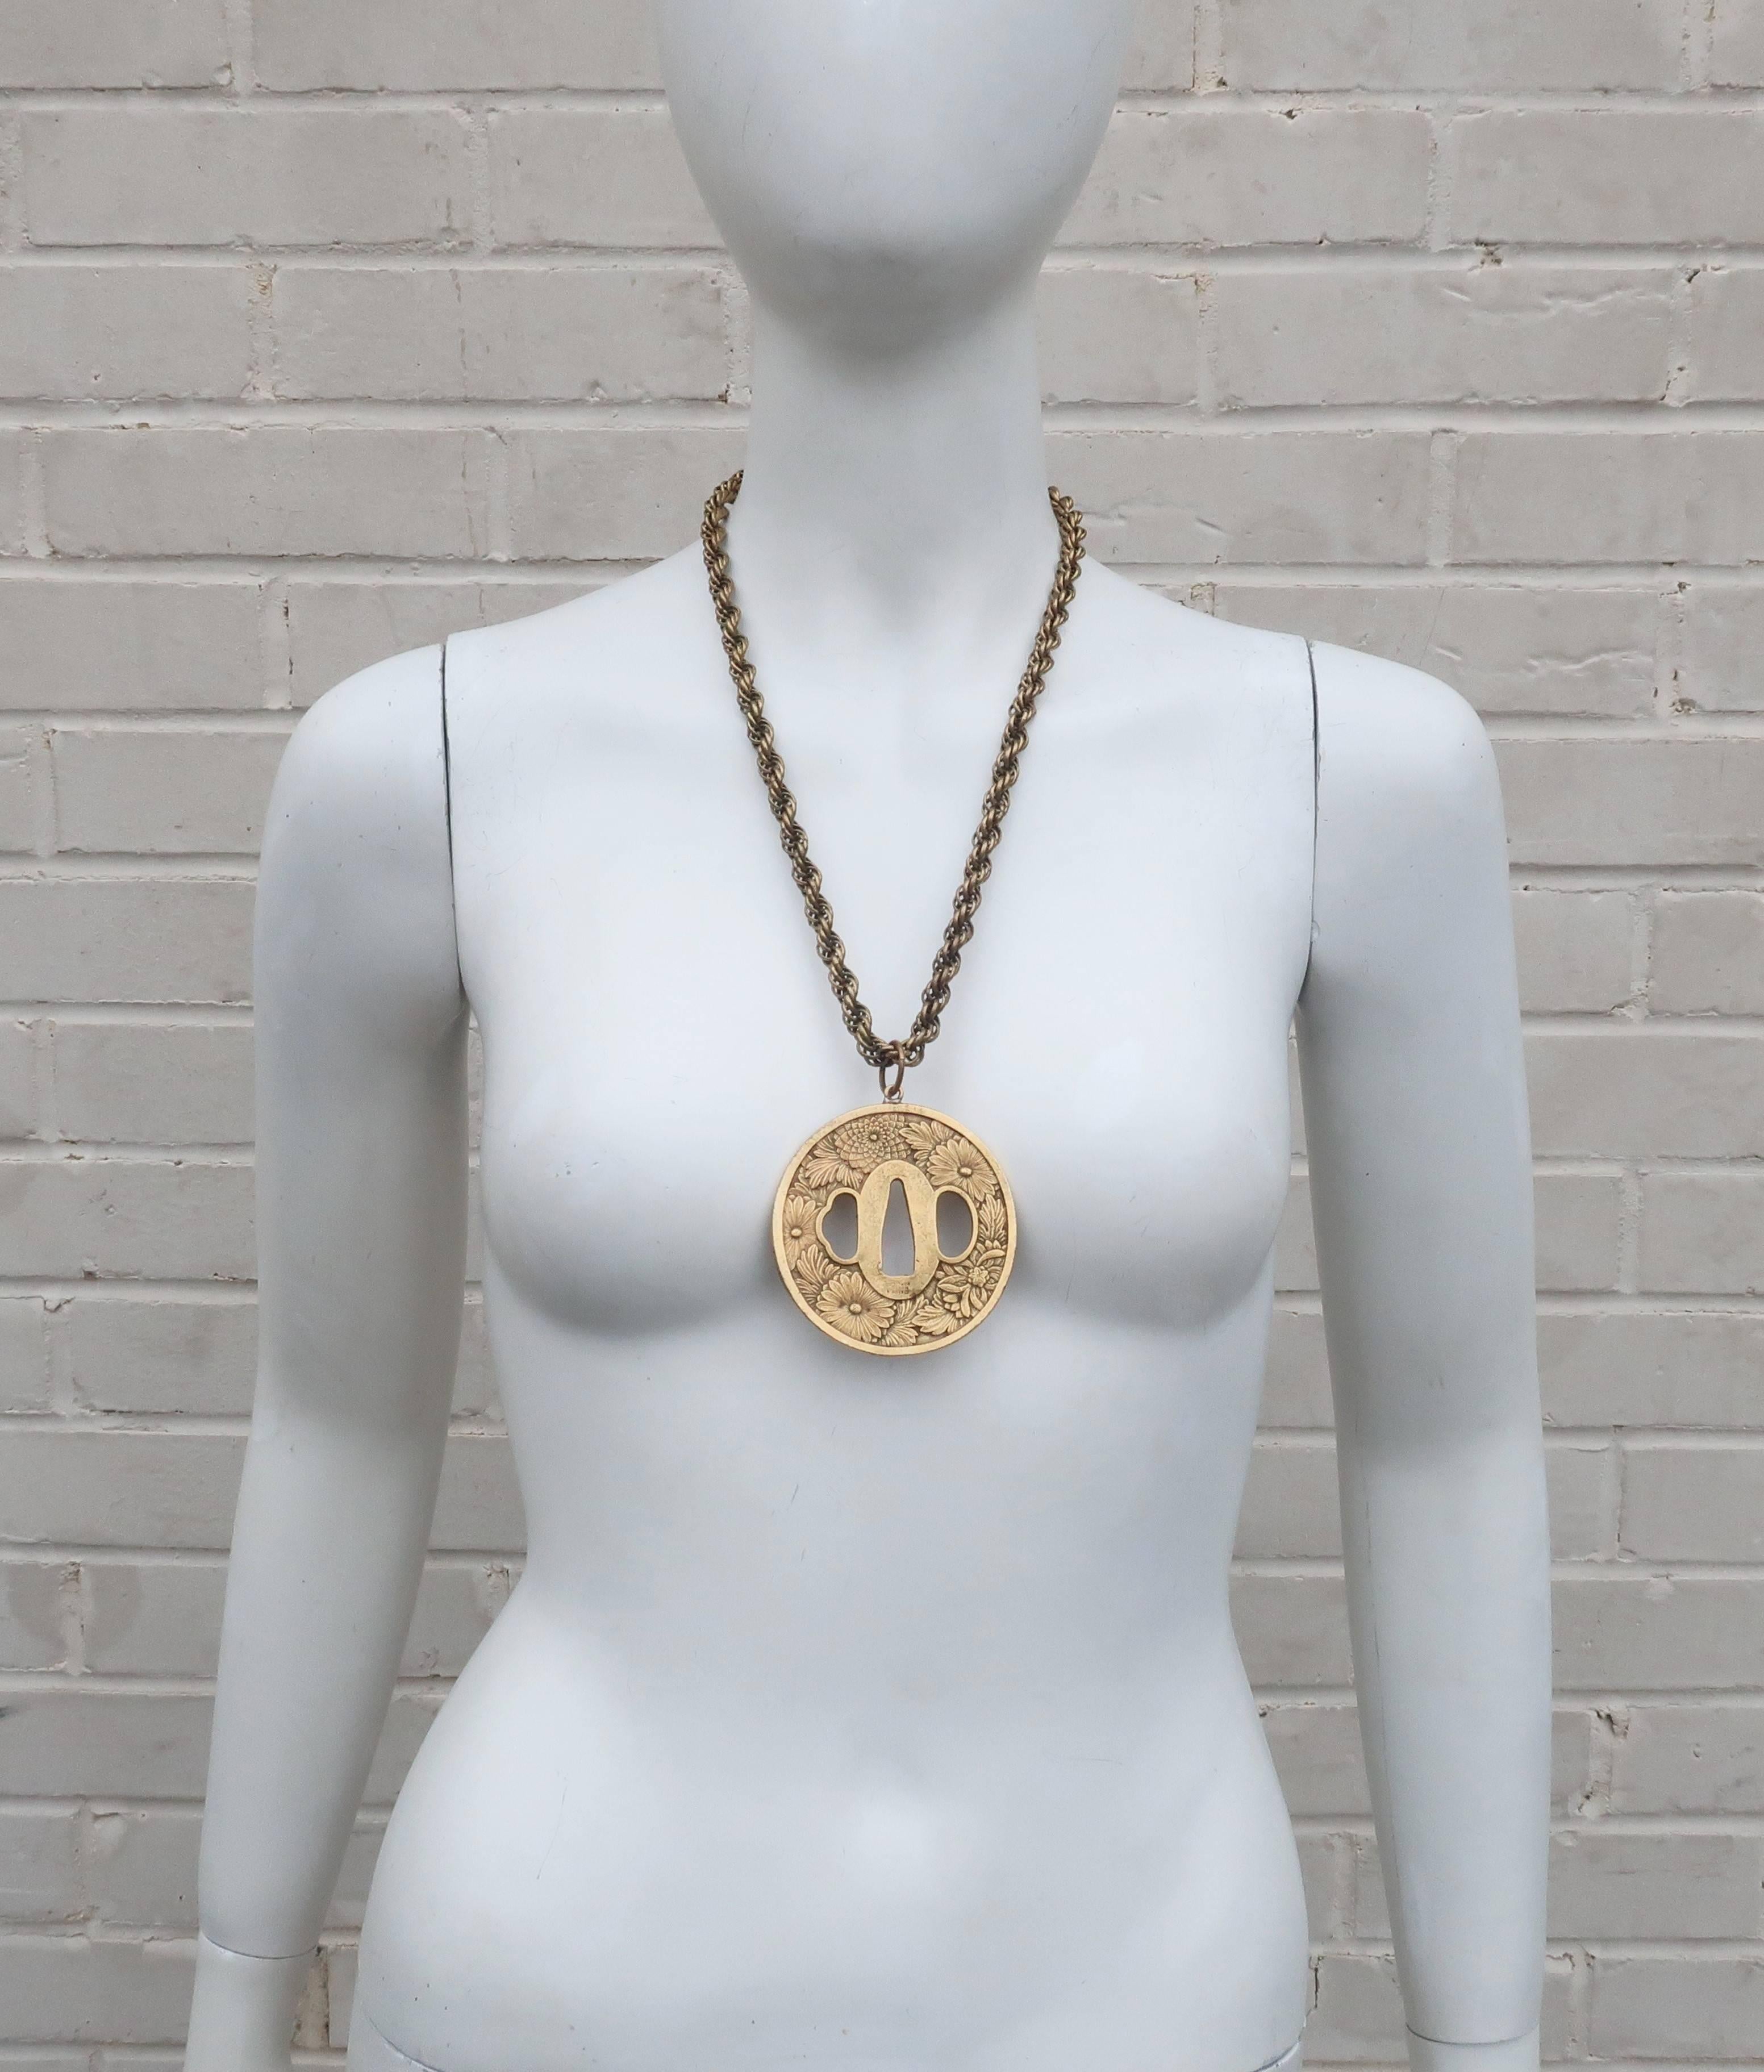 Alva Museum Replicas started designing decorative reproductions of antiquities and sculptures in the 1940’s for marketing in museum gift stores.  This brass medallion necklace is a replica of a Japanese tsuba or sword guard and depicts a